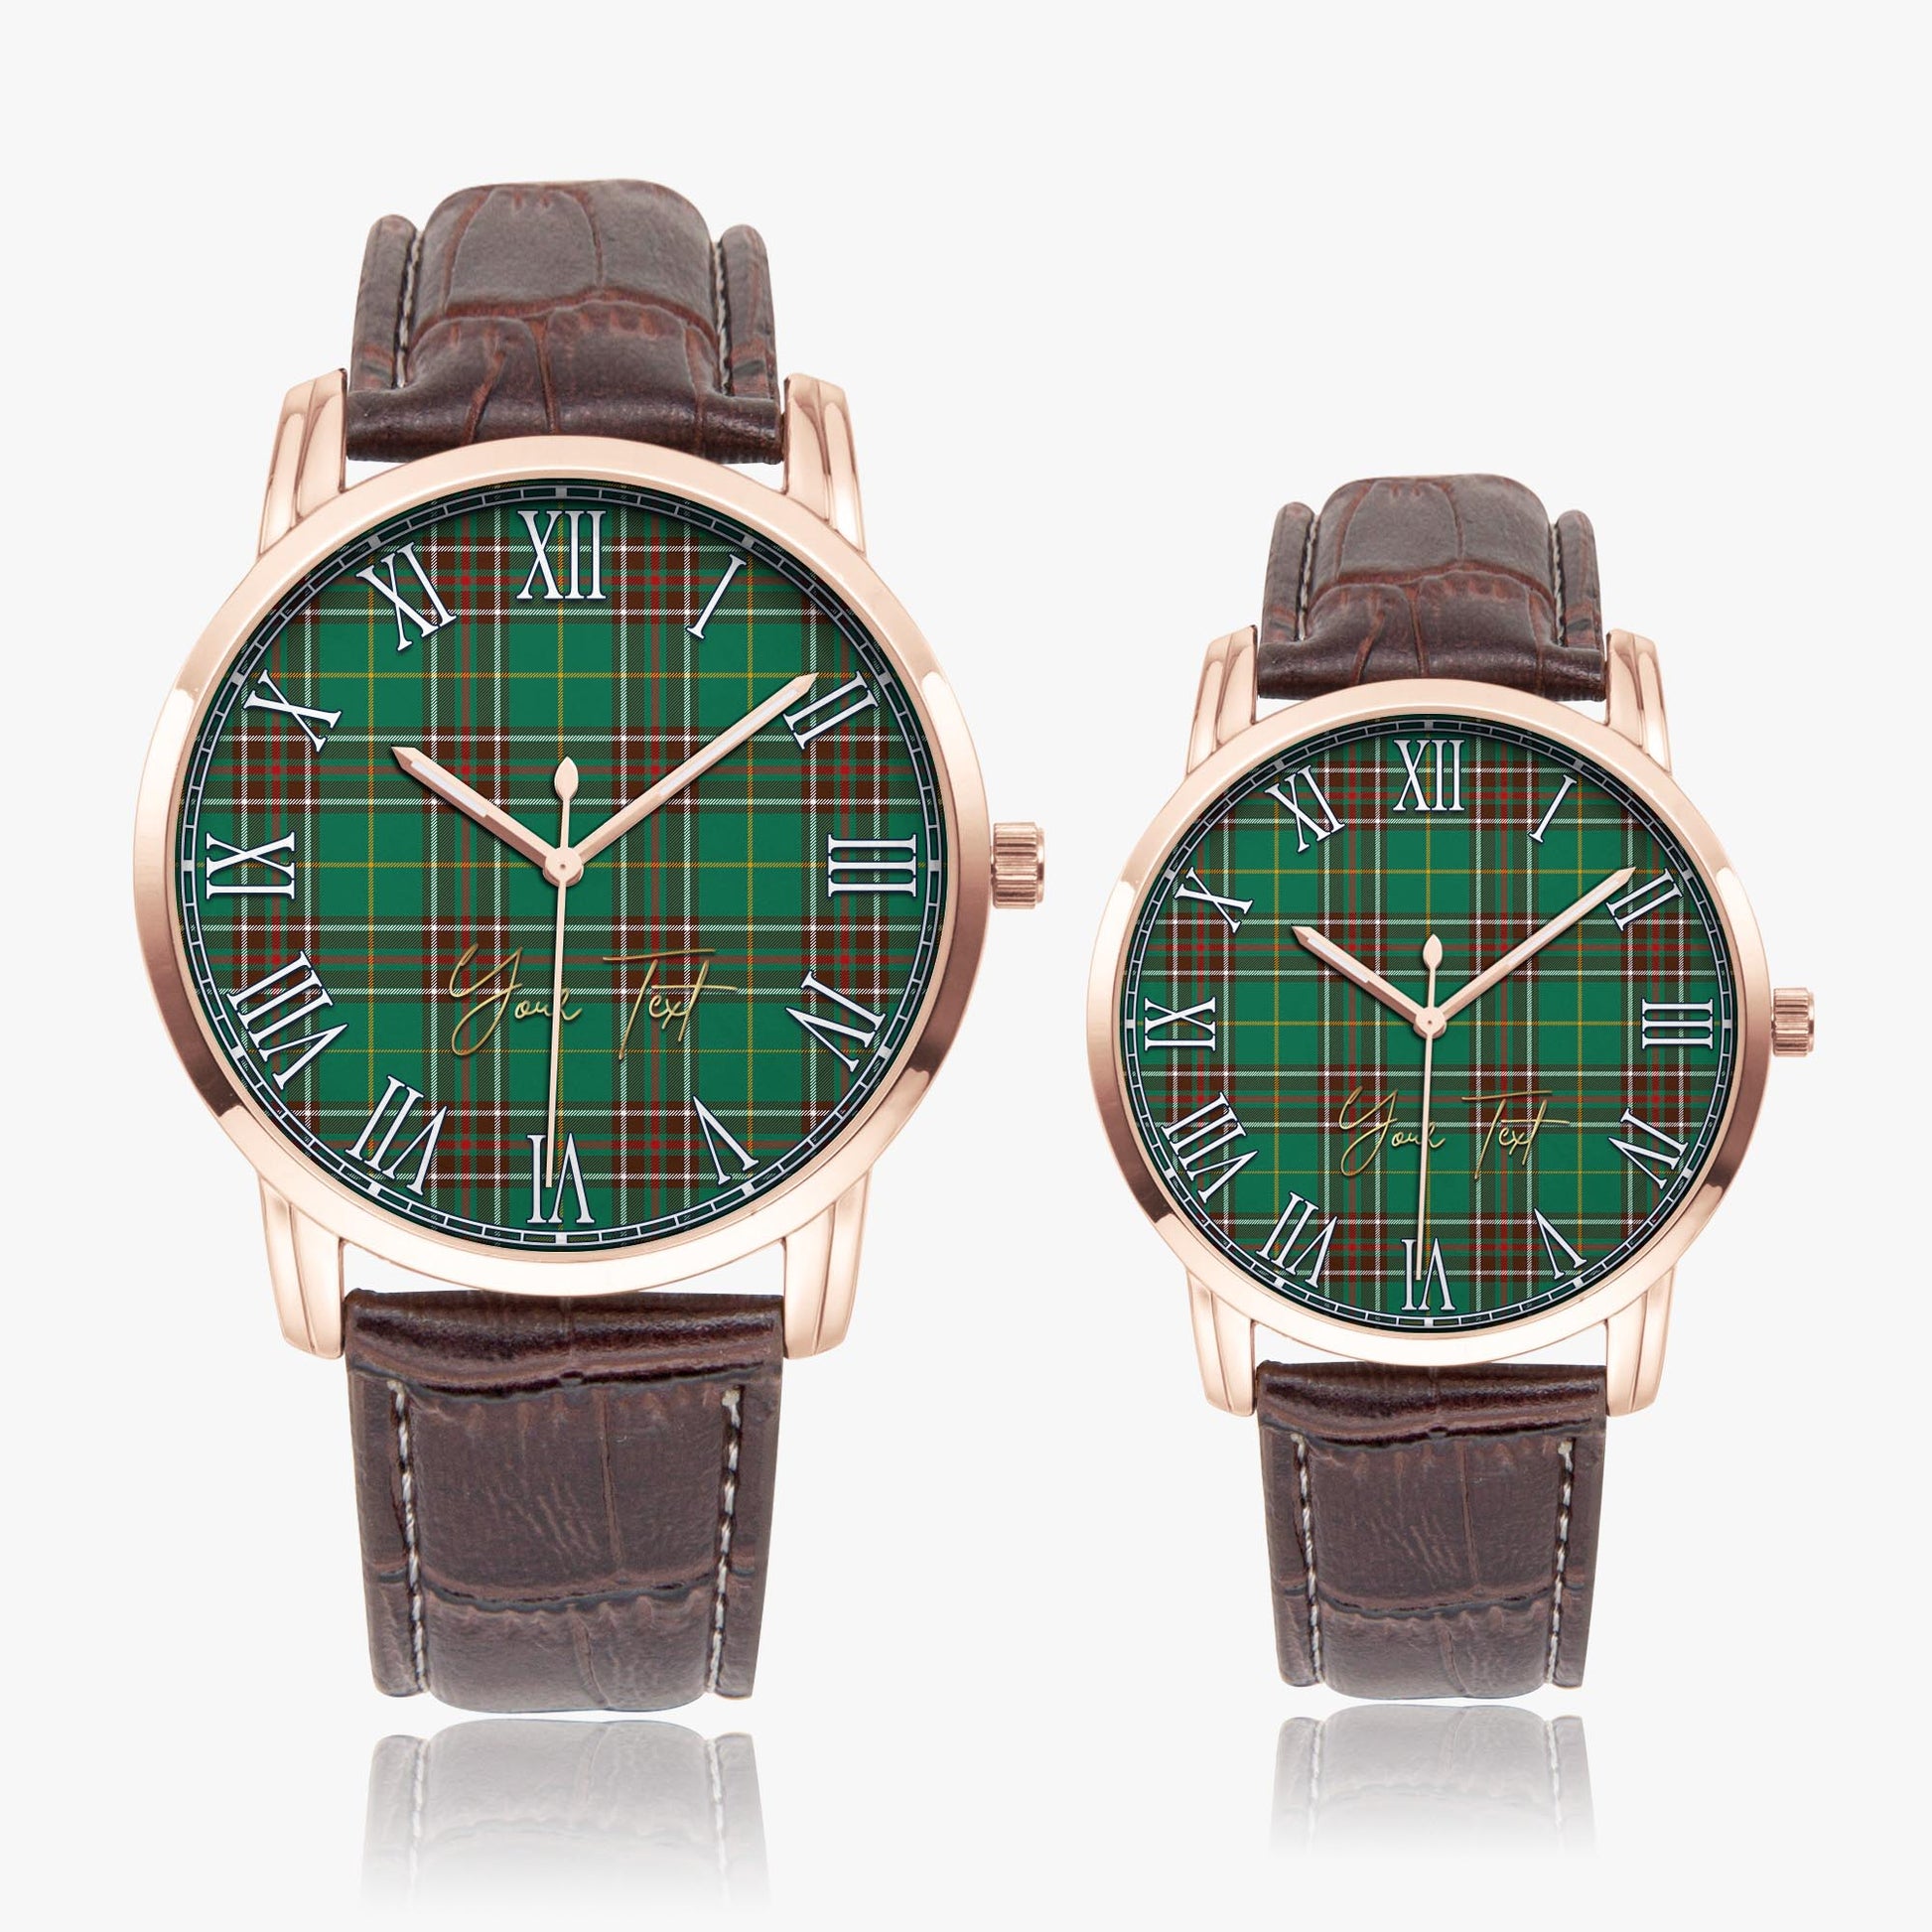 Newfoundland And Labrador Province Canada Tartan Personalized Your Text Leather Trap Quartz Watch Wide Type Rose Gold Case With Brown Leather Strap - Tartanvibesclothing